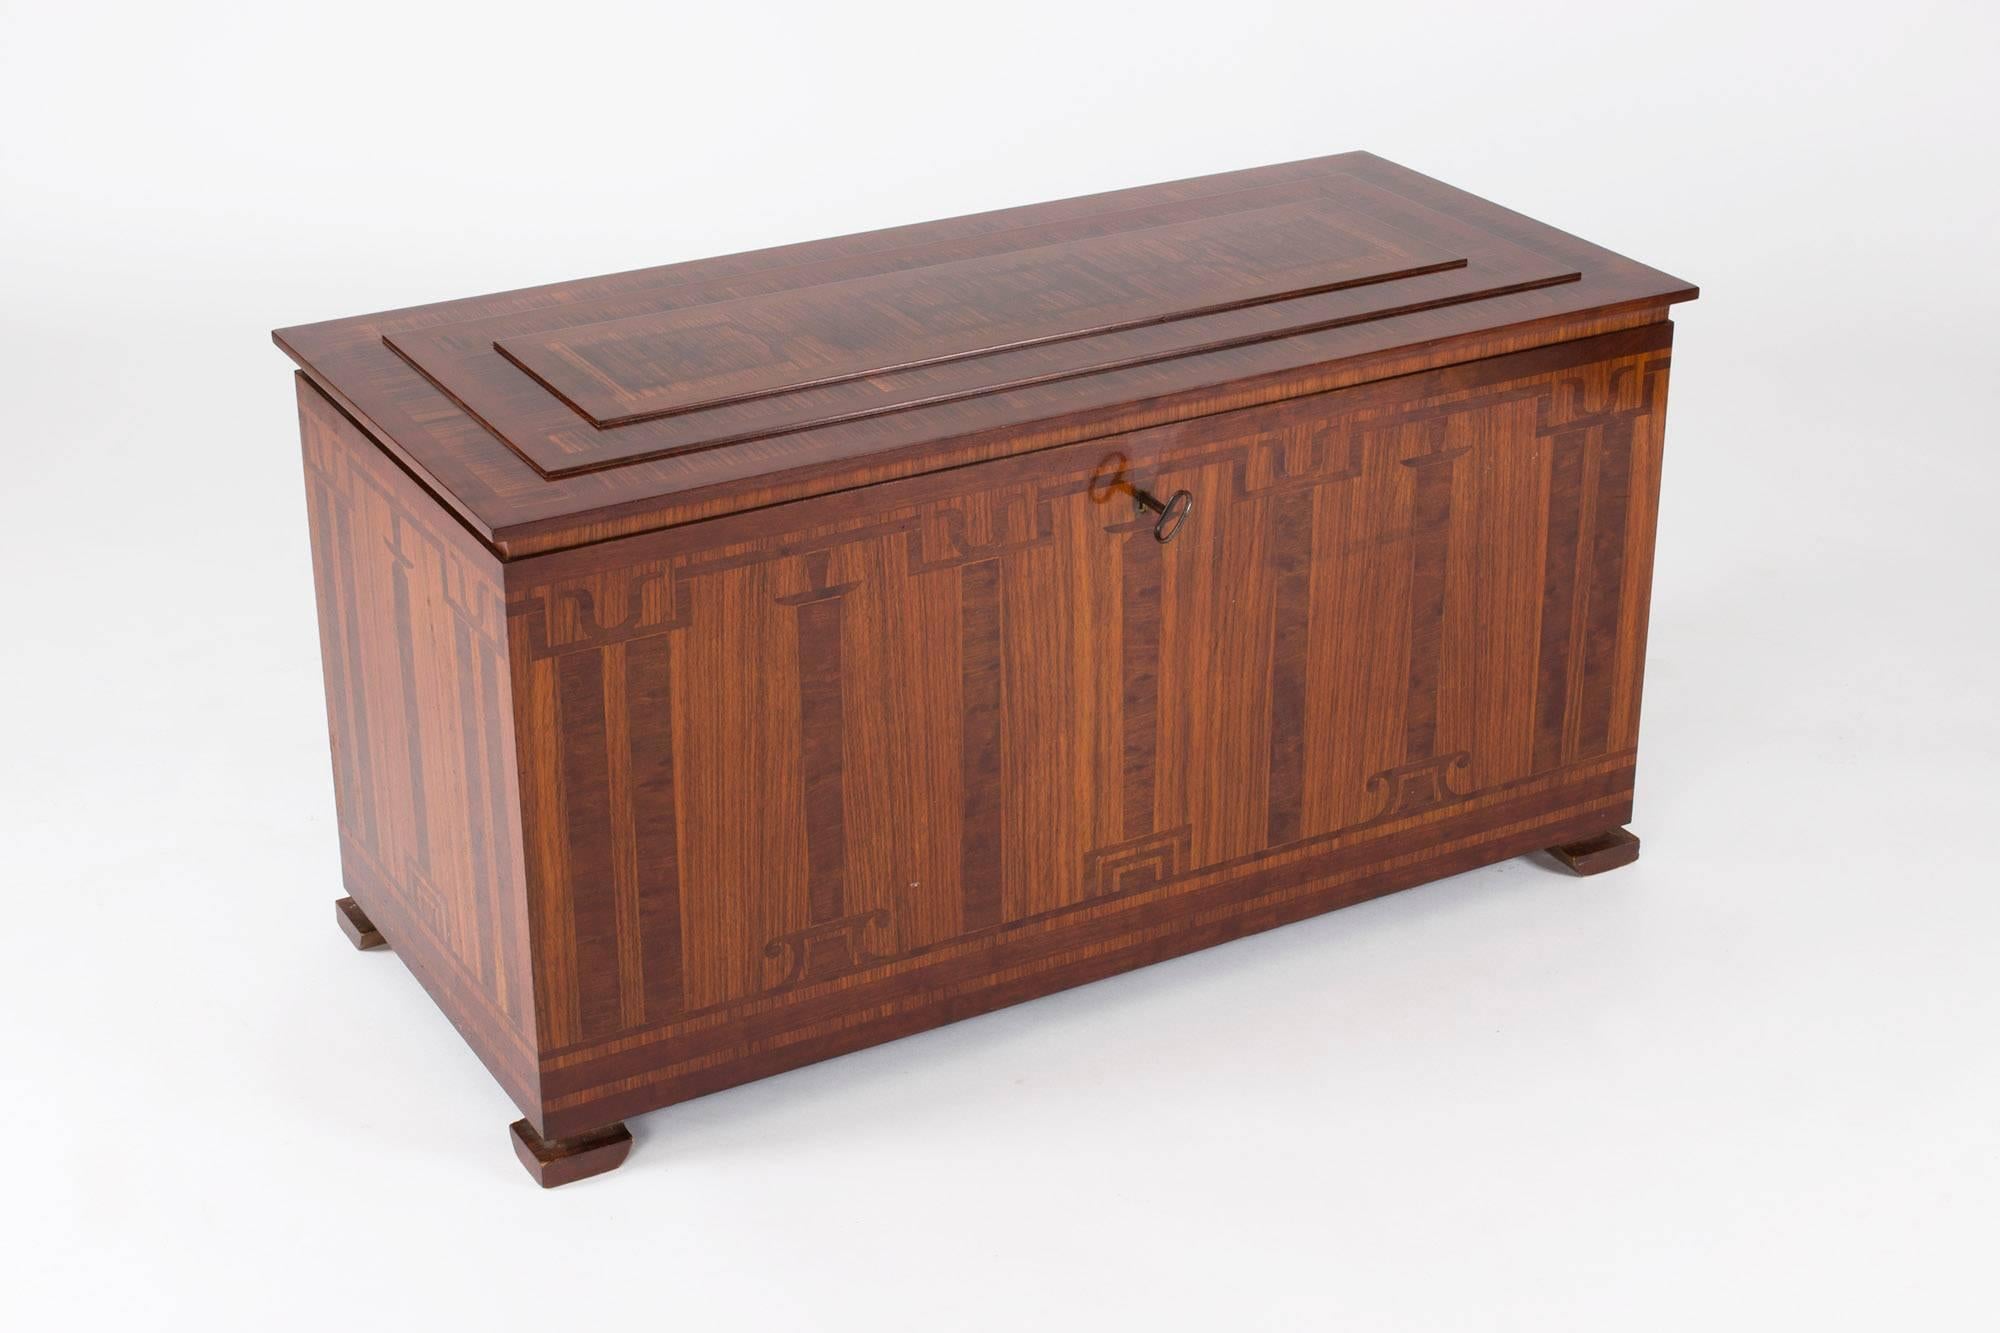 Swedish Art Deco Chest with Inlays by Carl Malmsten